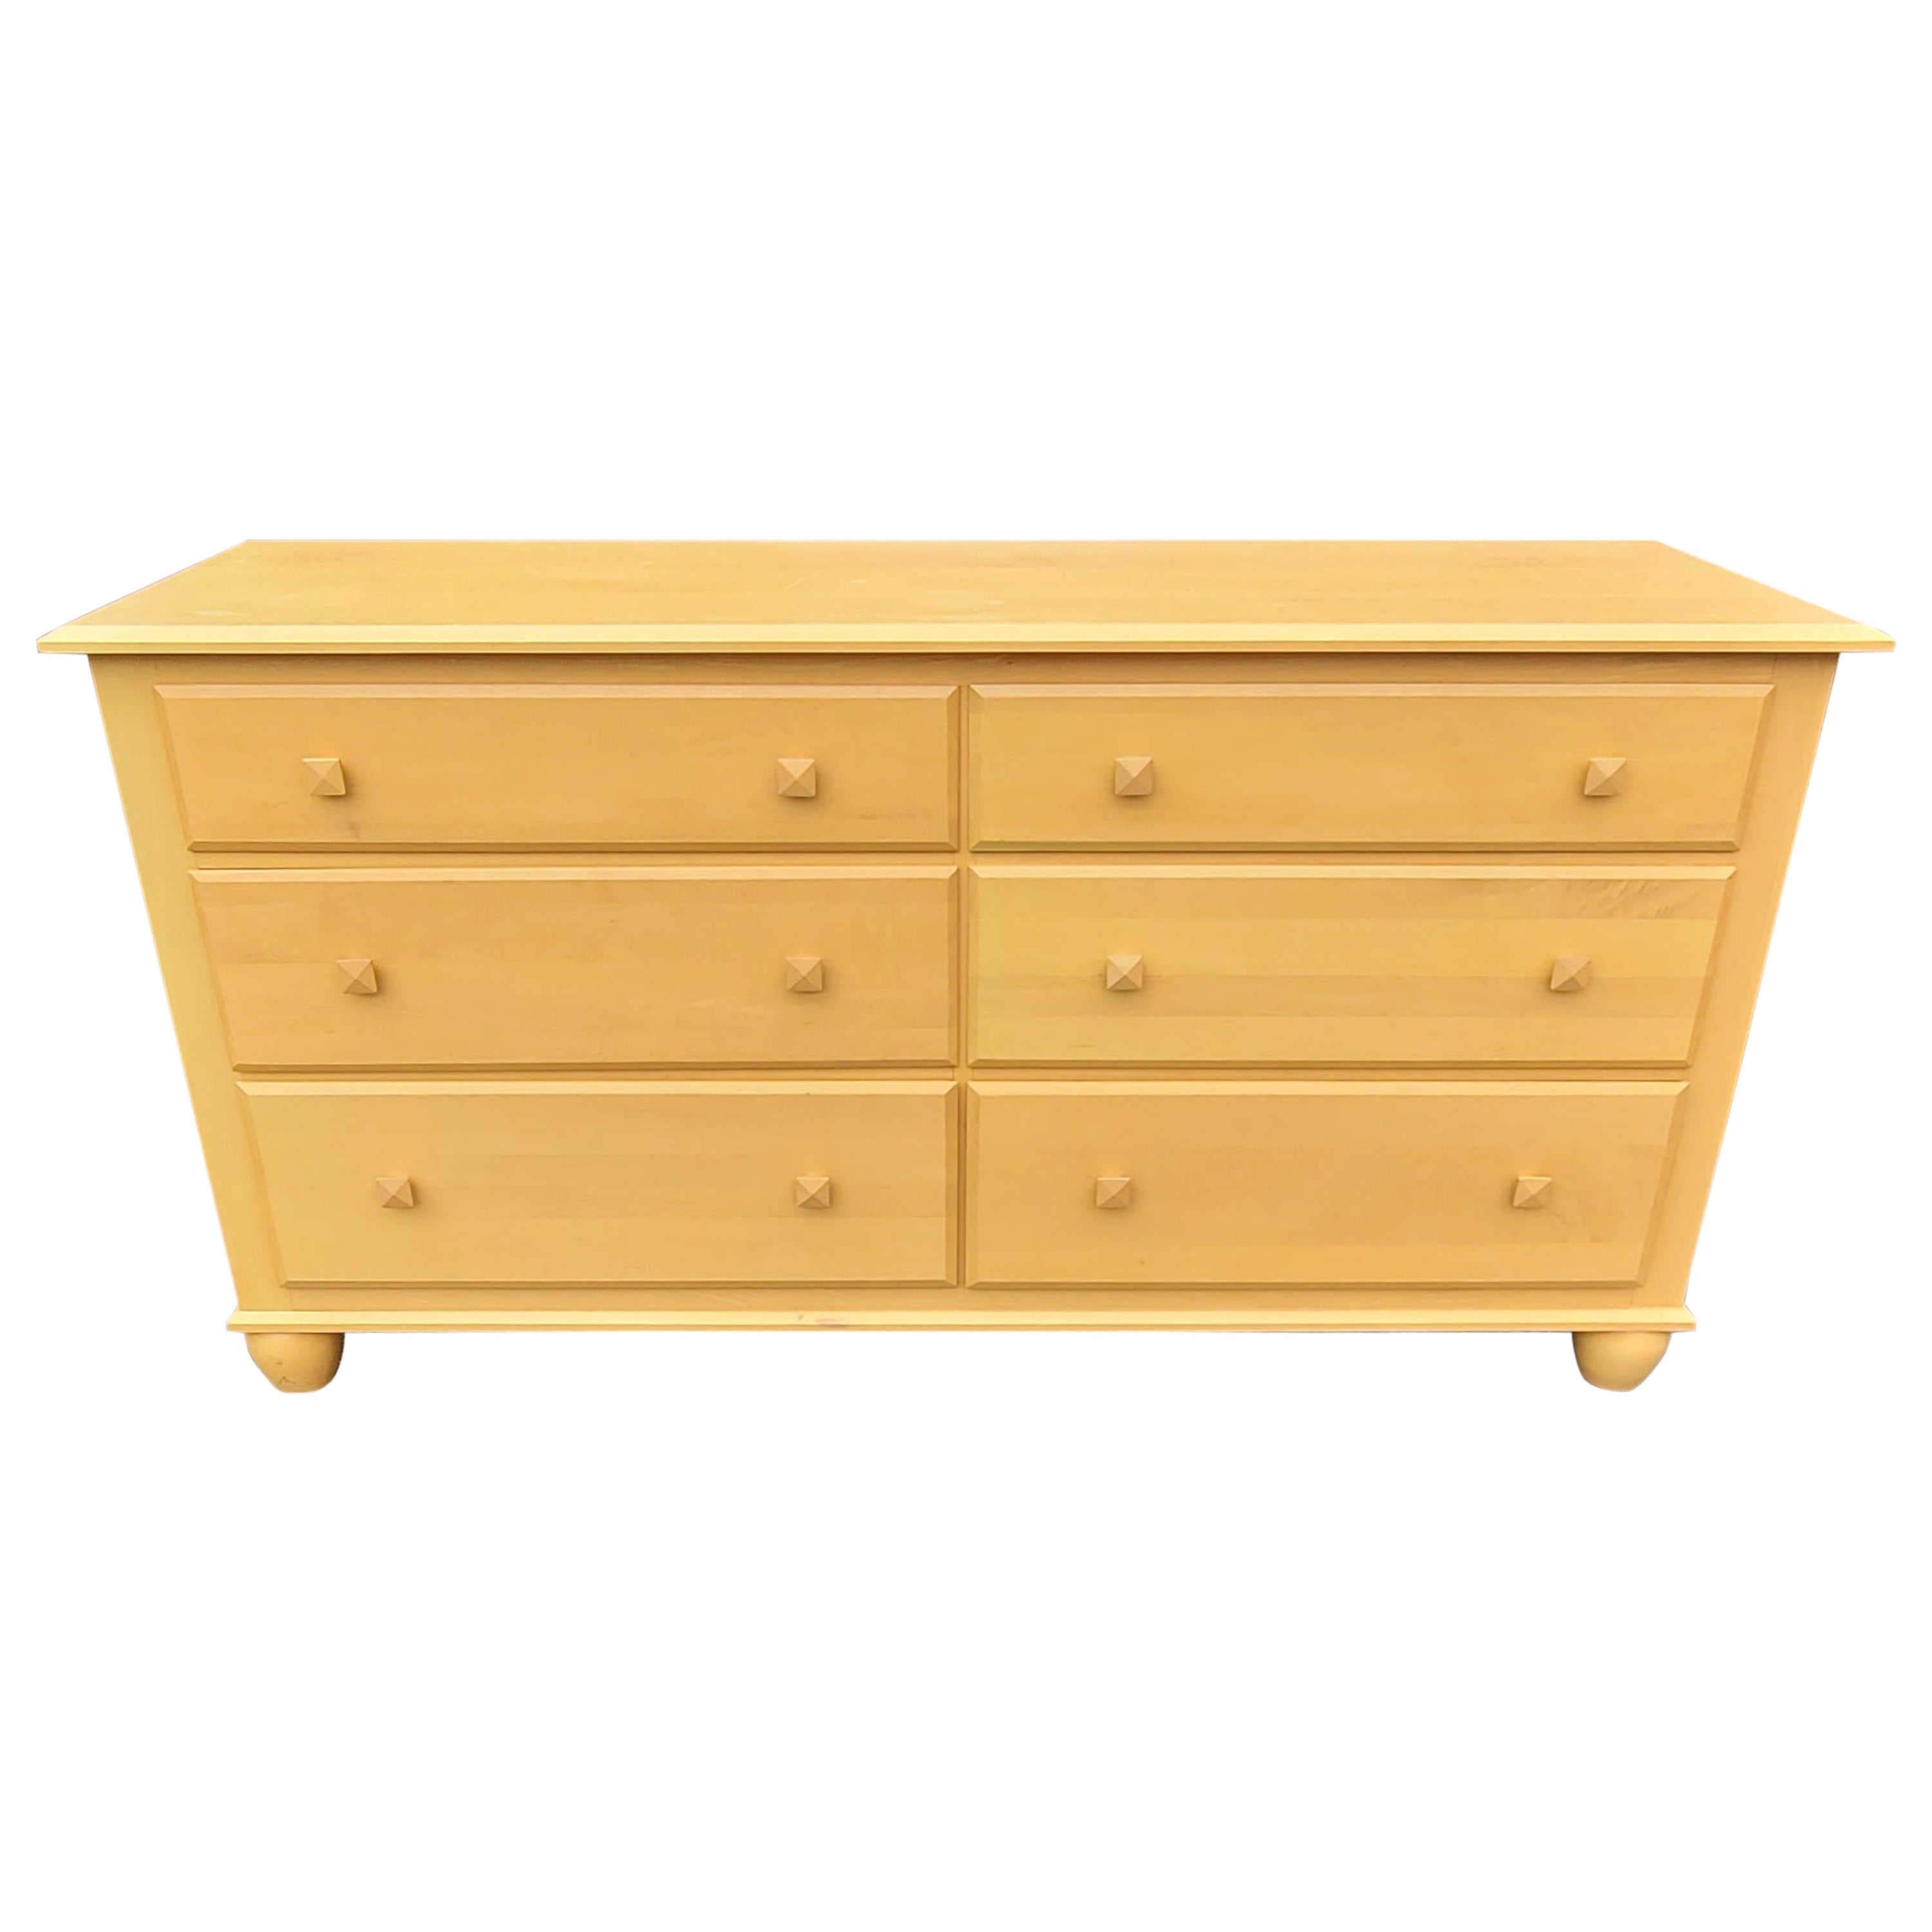 Ethan Allen American Dimensions Collection Birch Double Dresser